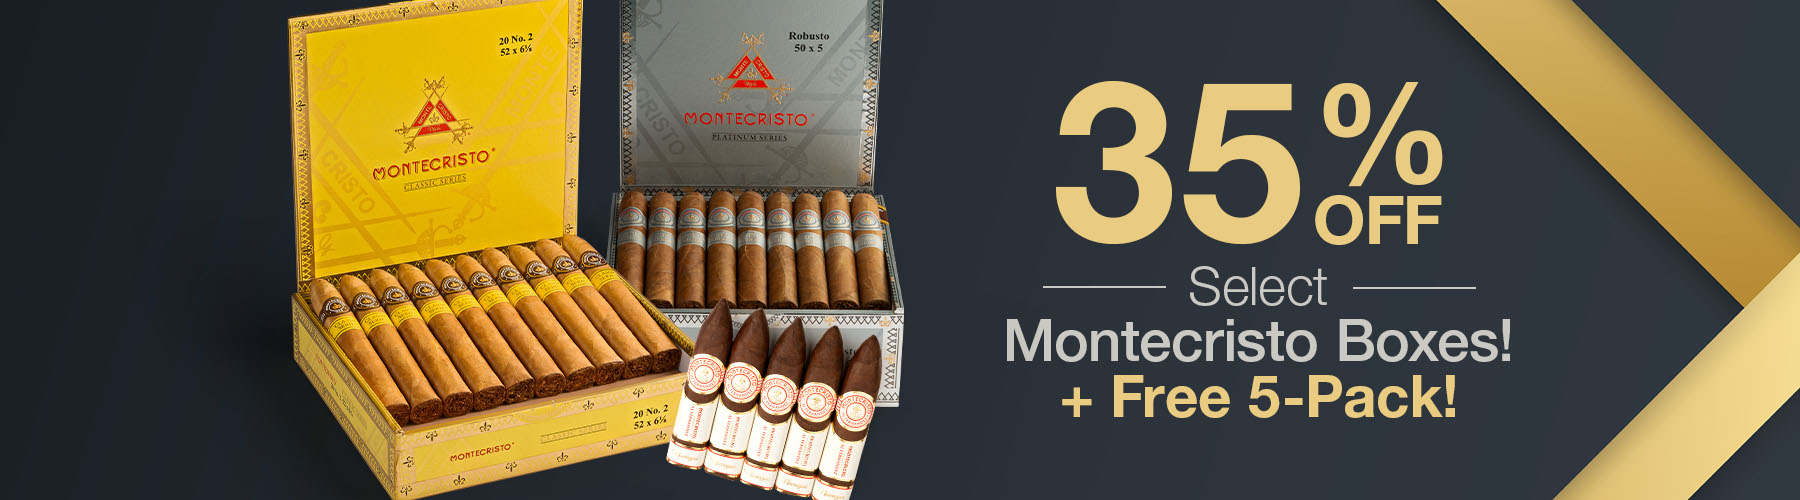 35% off
Select Montecristo Boxes + Free 5-Pack!